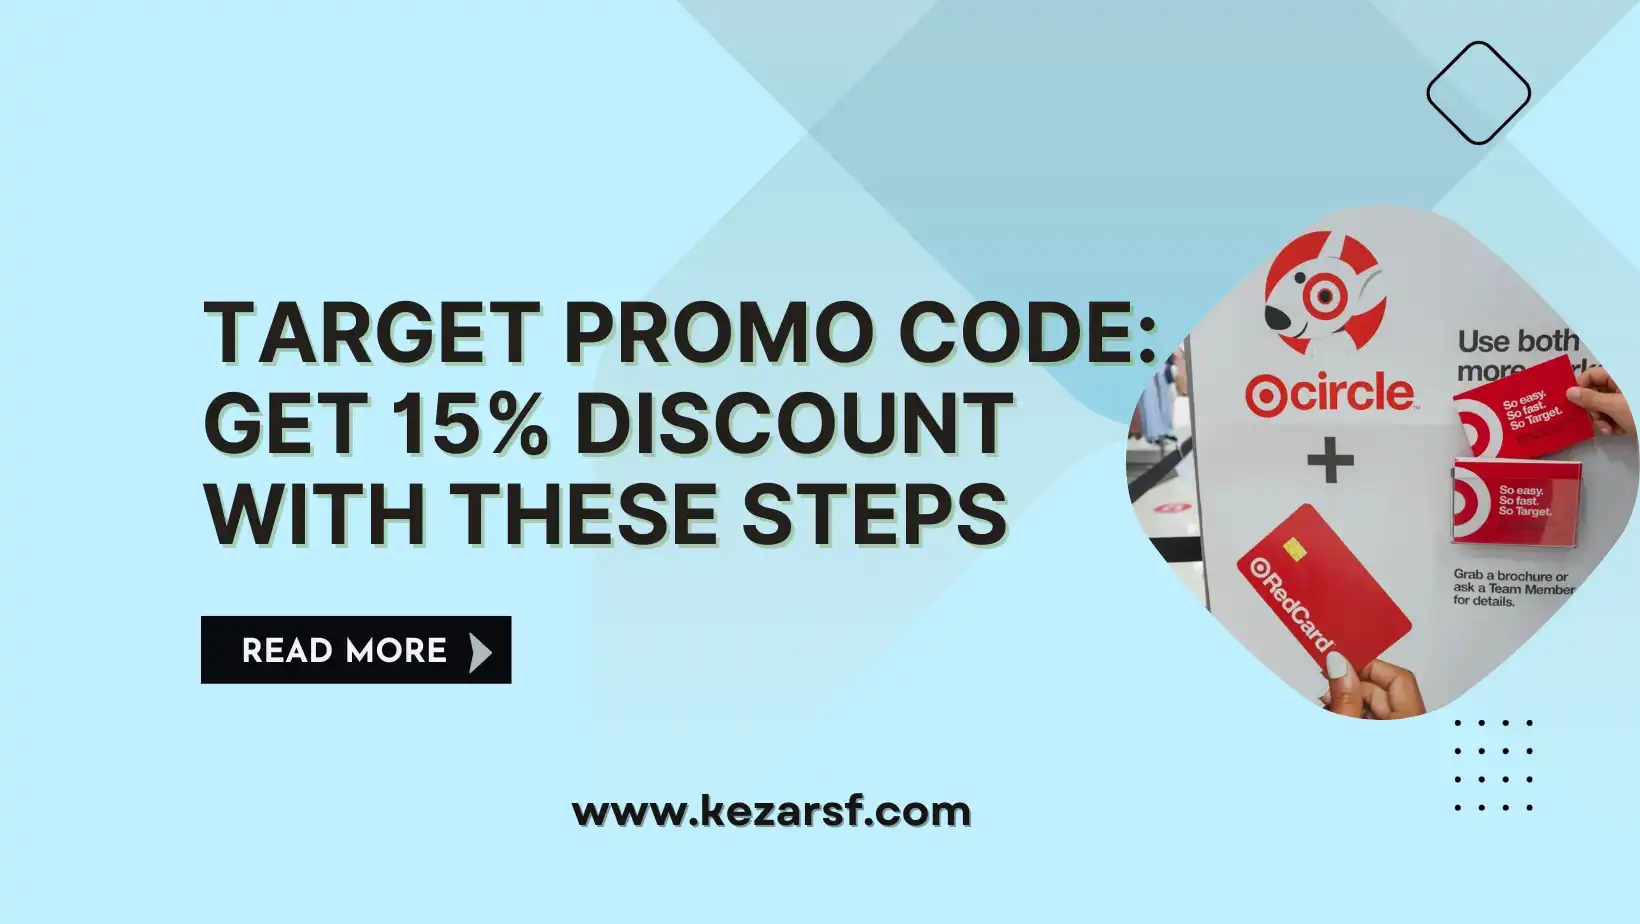 Target Promo Code: Get 15% Discount with these Steps